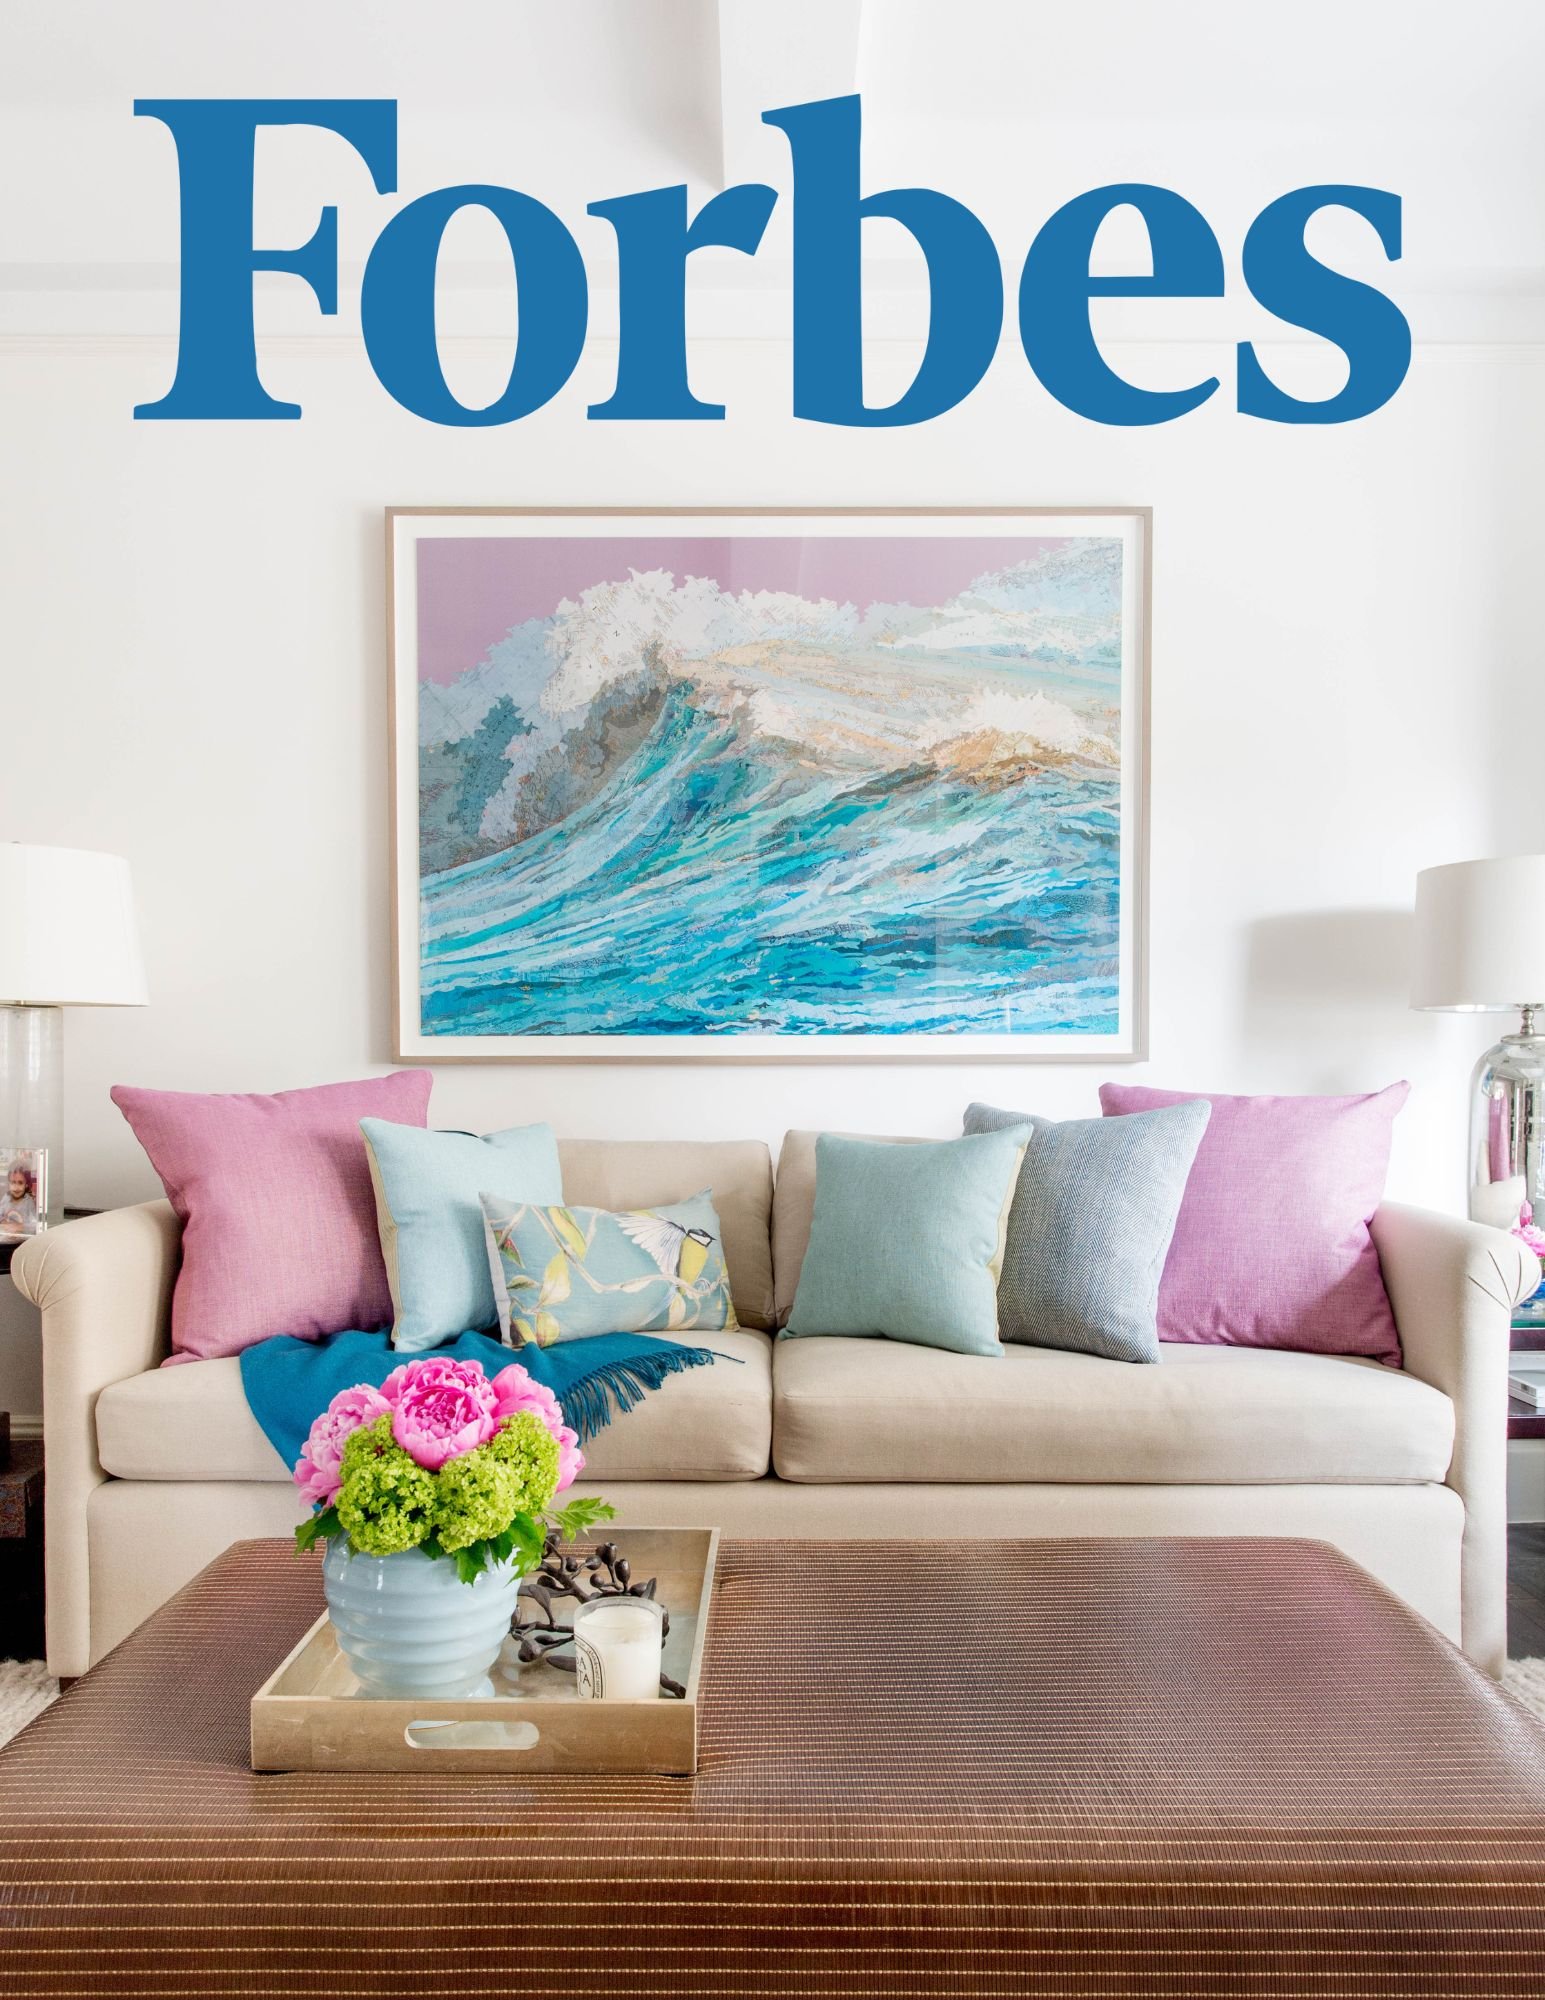 Forbes 10 Tips To Refresh Your Design For Spring.jpg